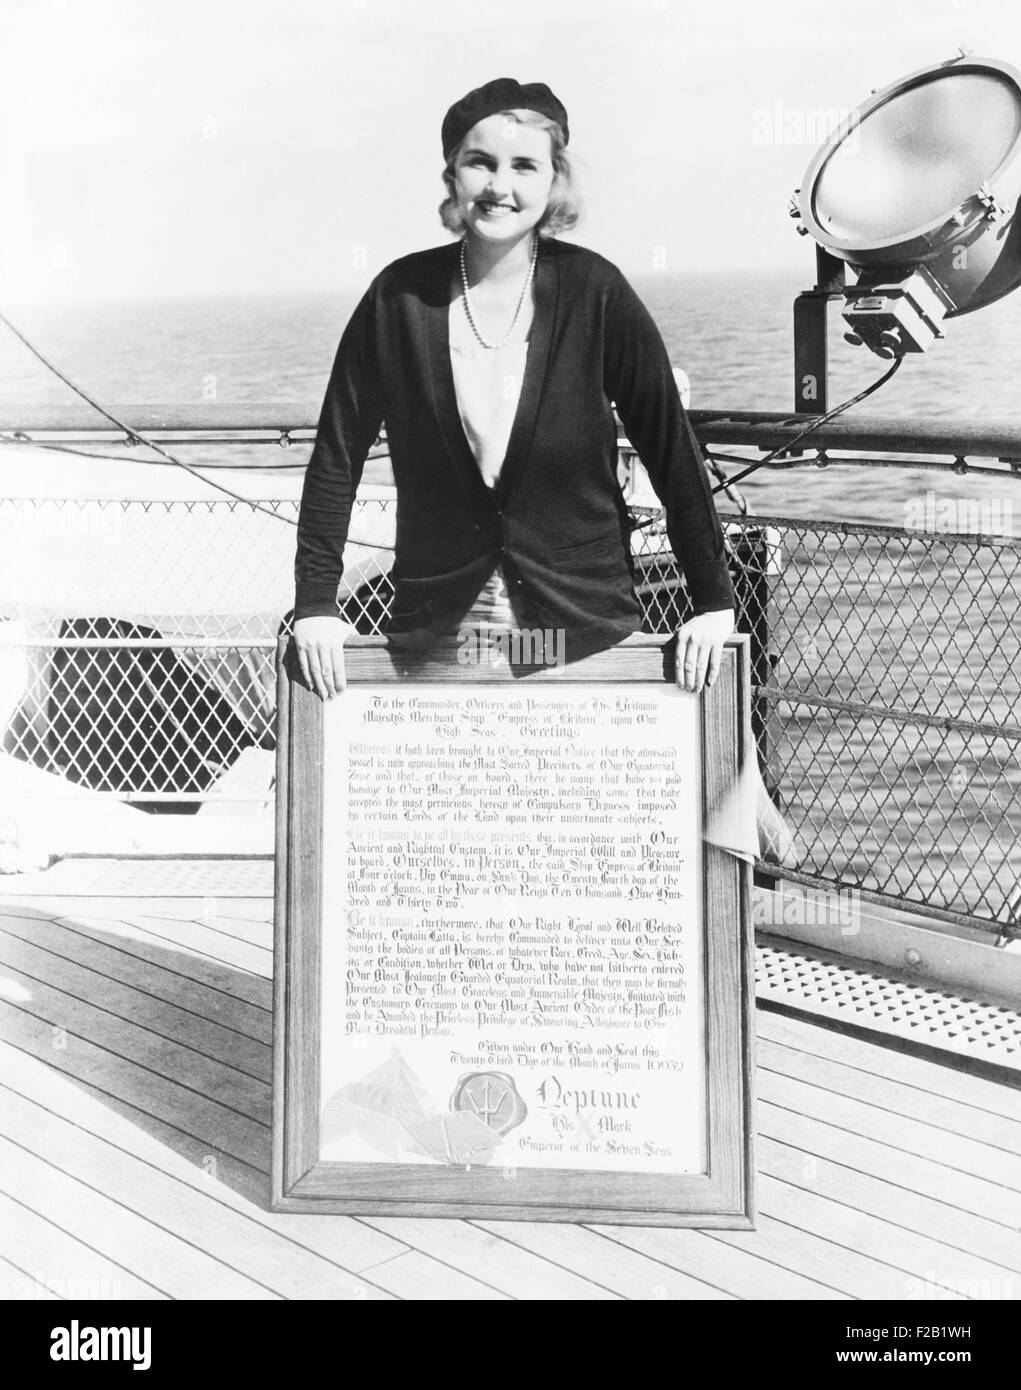 Barbara Hutton, Woolworth heiress, on the deck of an ocean liner. She smiles as she displays her diploma from King Neptune. Jan. 23, 1932. (CSU 2015 7 402) Stock Photo